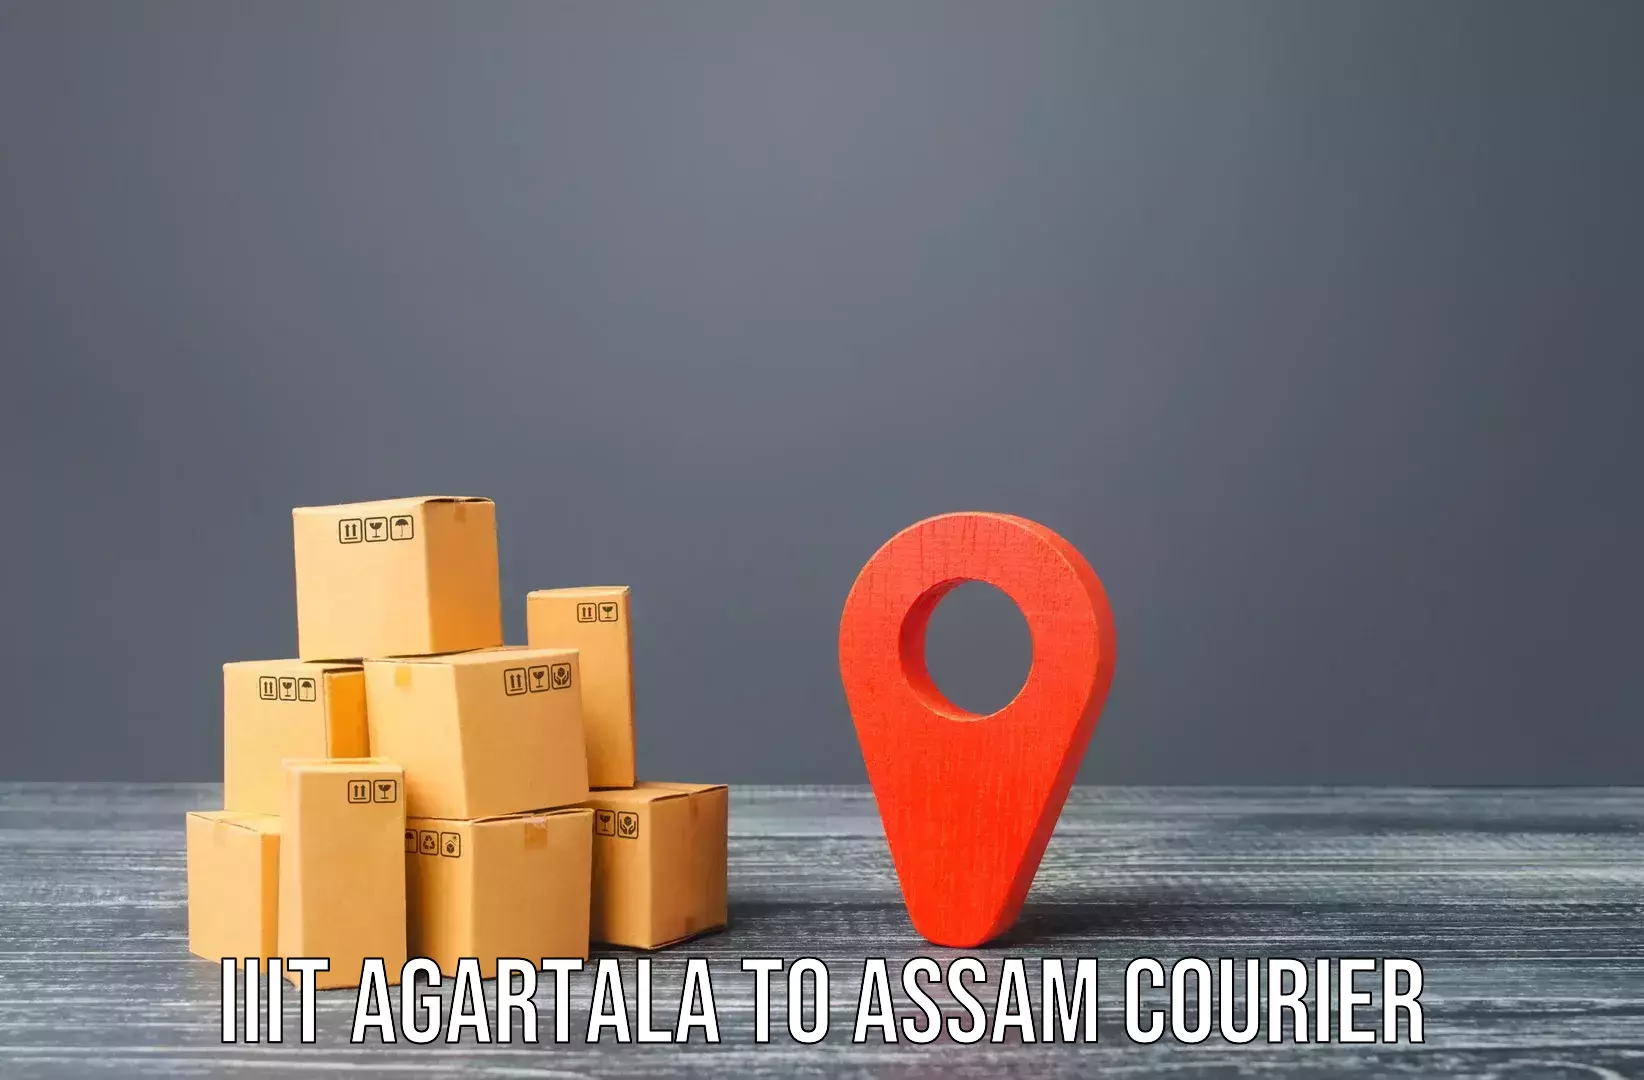 Trusted relocation experts IIIT Agartala to Hojai